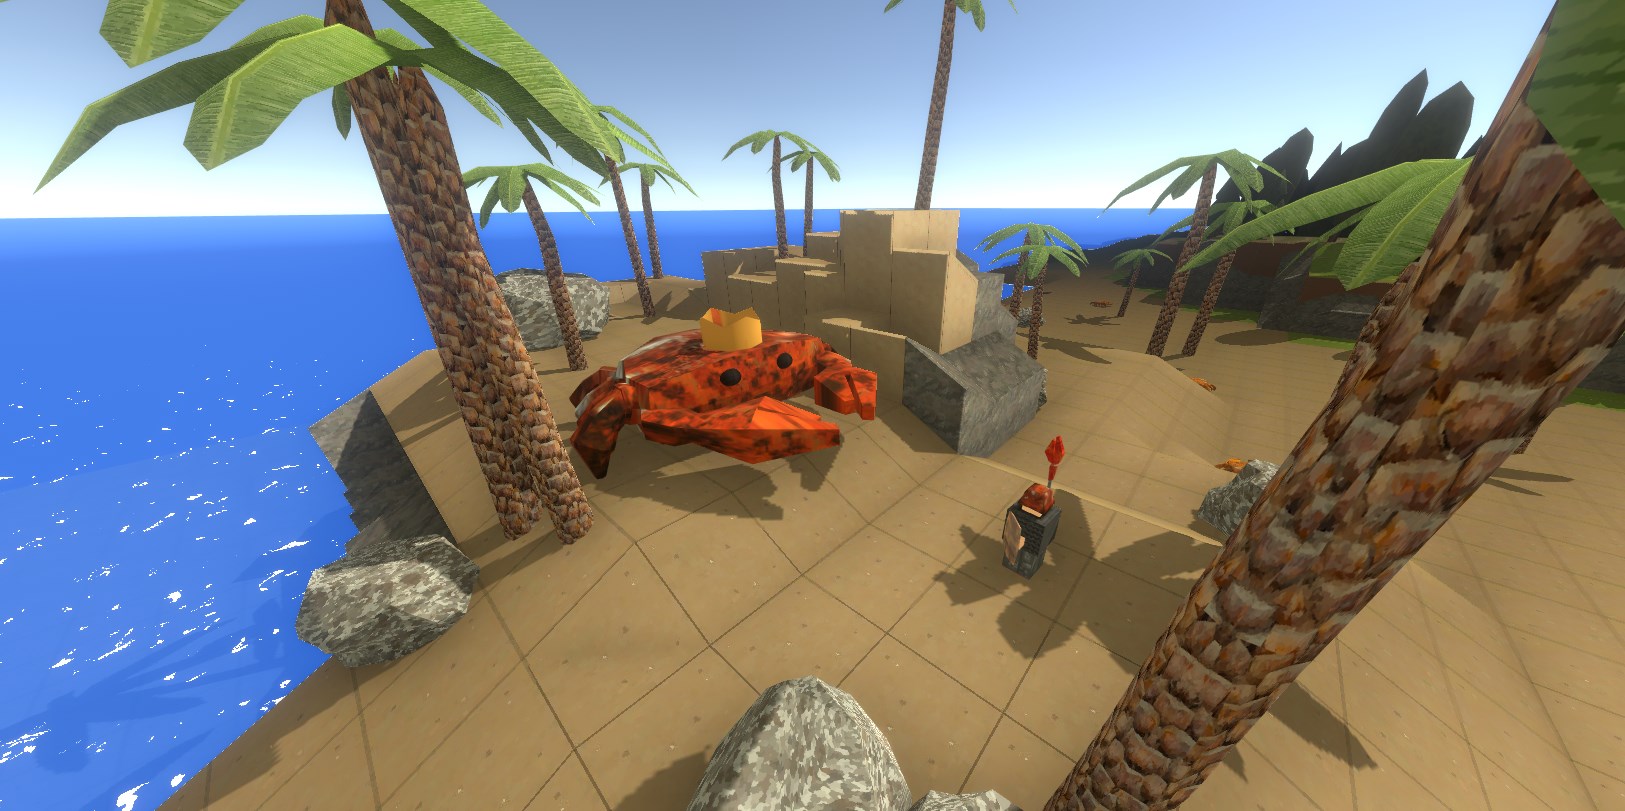 A player standing in front of a giant crab